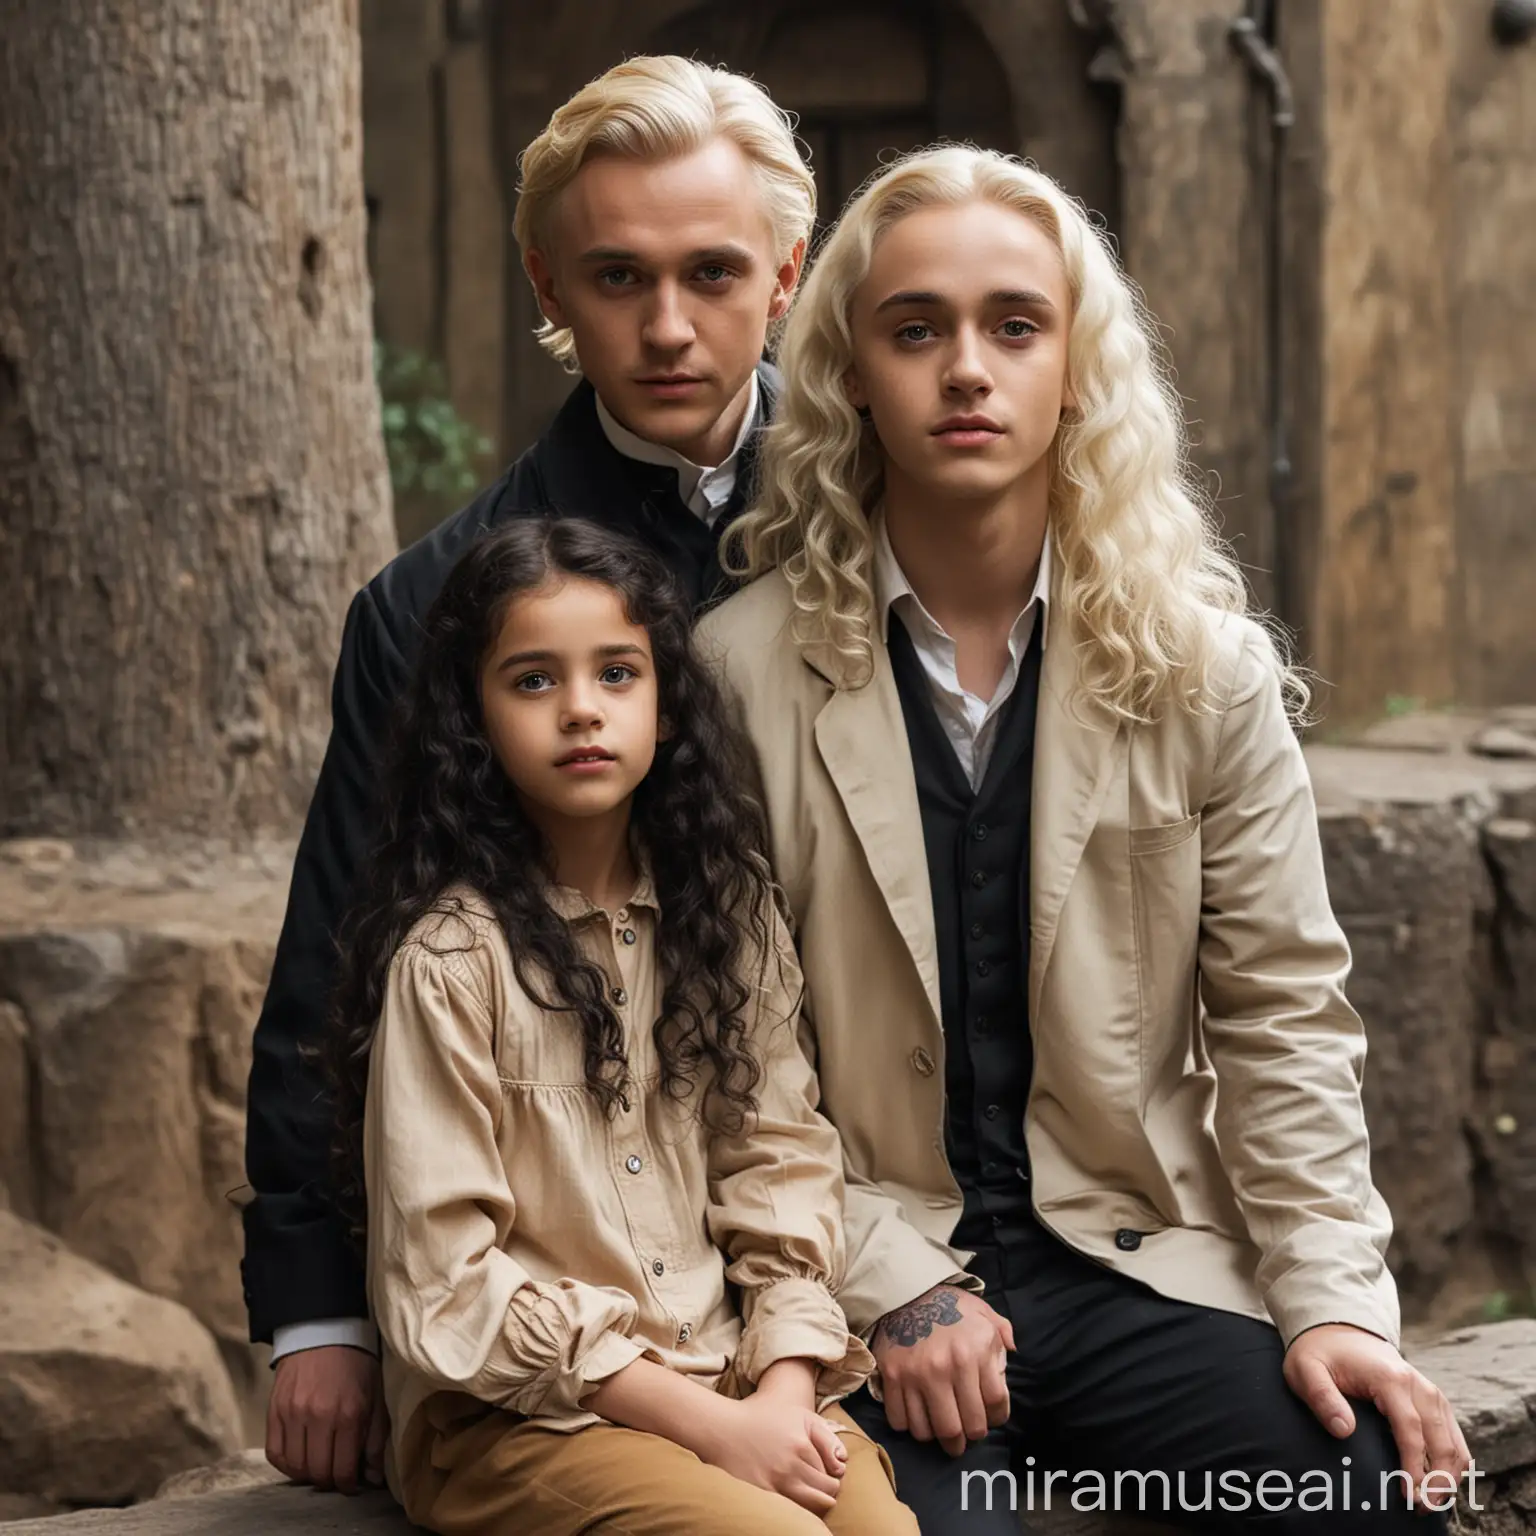 Stylish Draco Malfoy Escorting CurlyHaired Girl at the Zoo